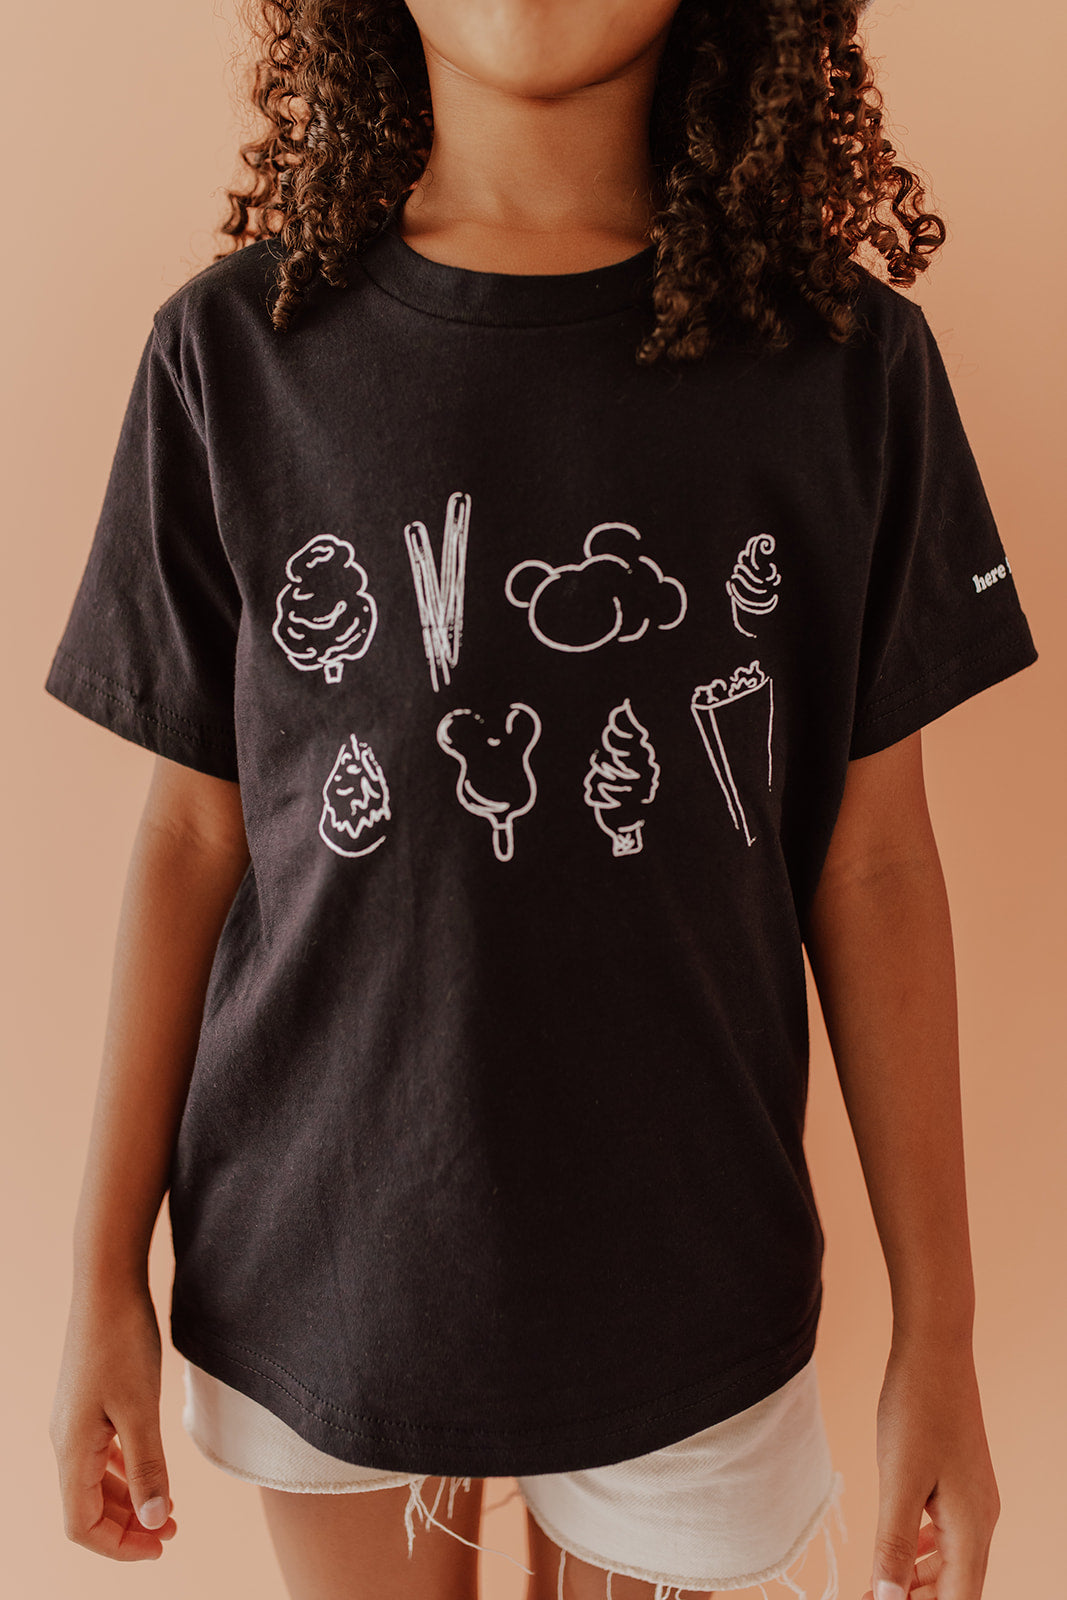 THE SNACK KIDS TEE BY HAPPY THREADS X PINK DESERT